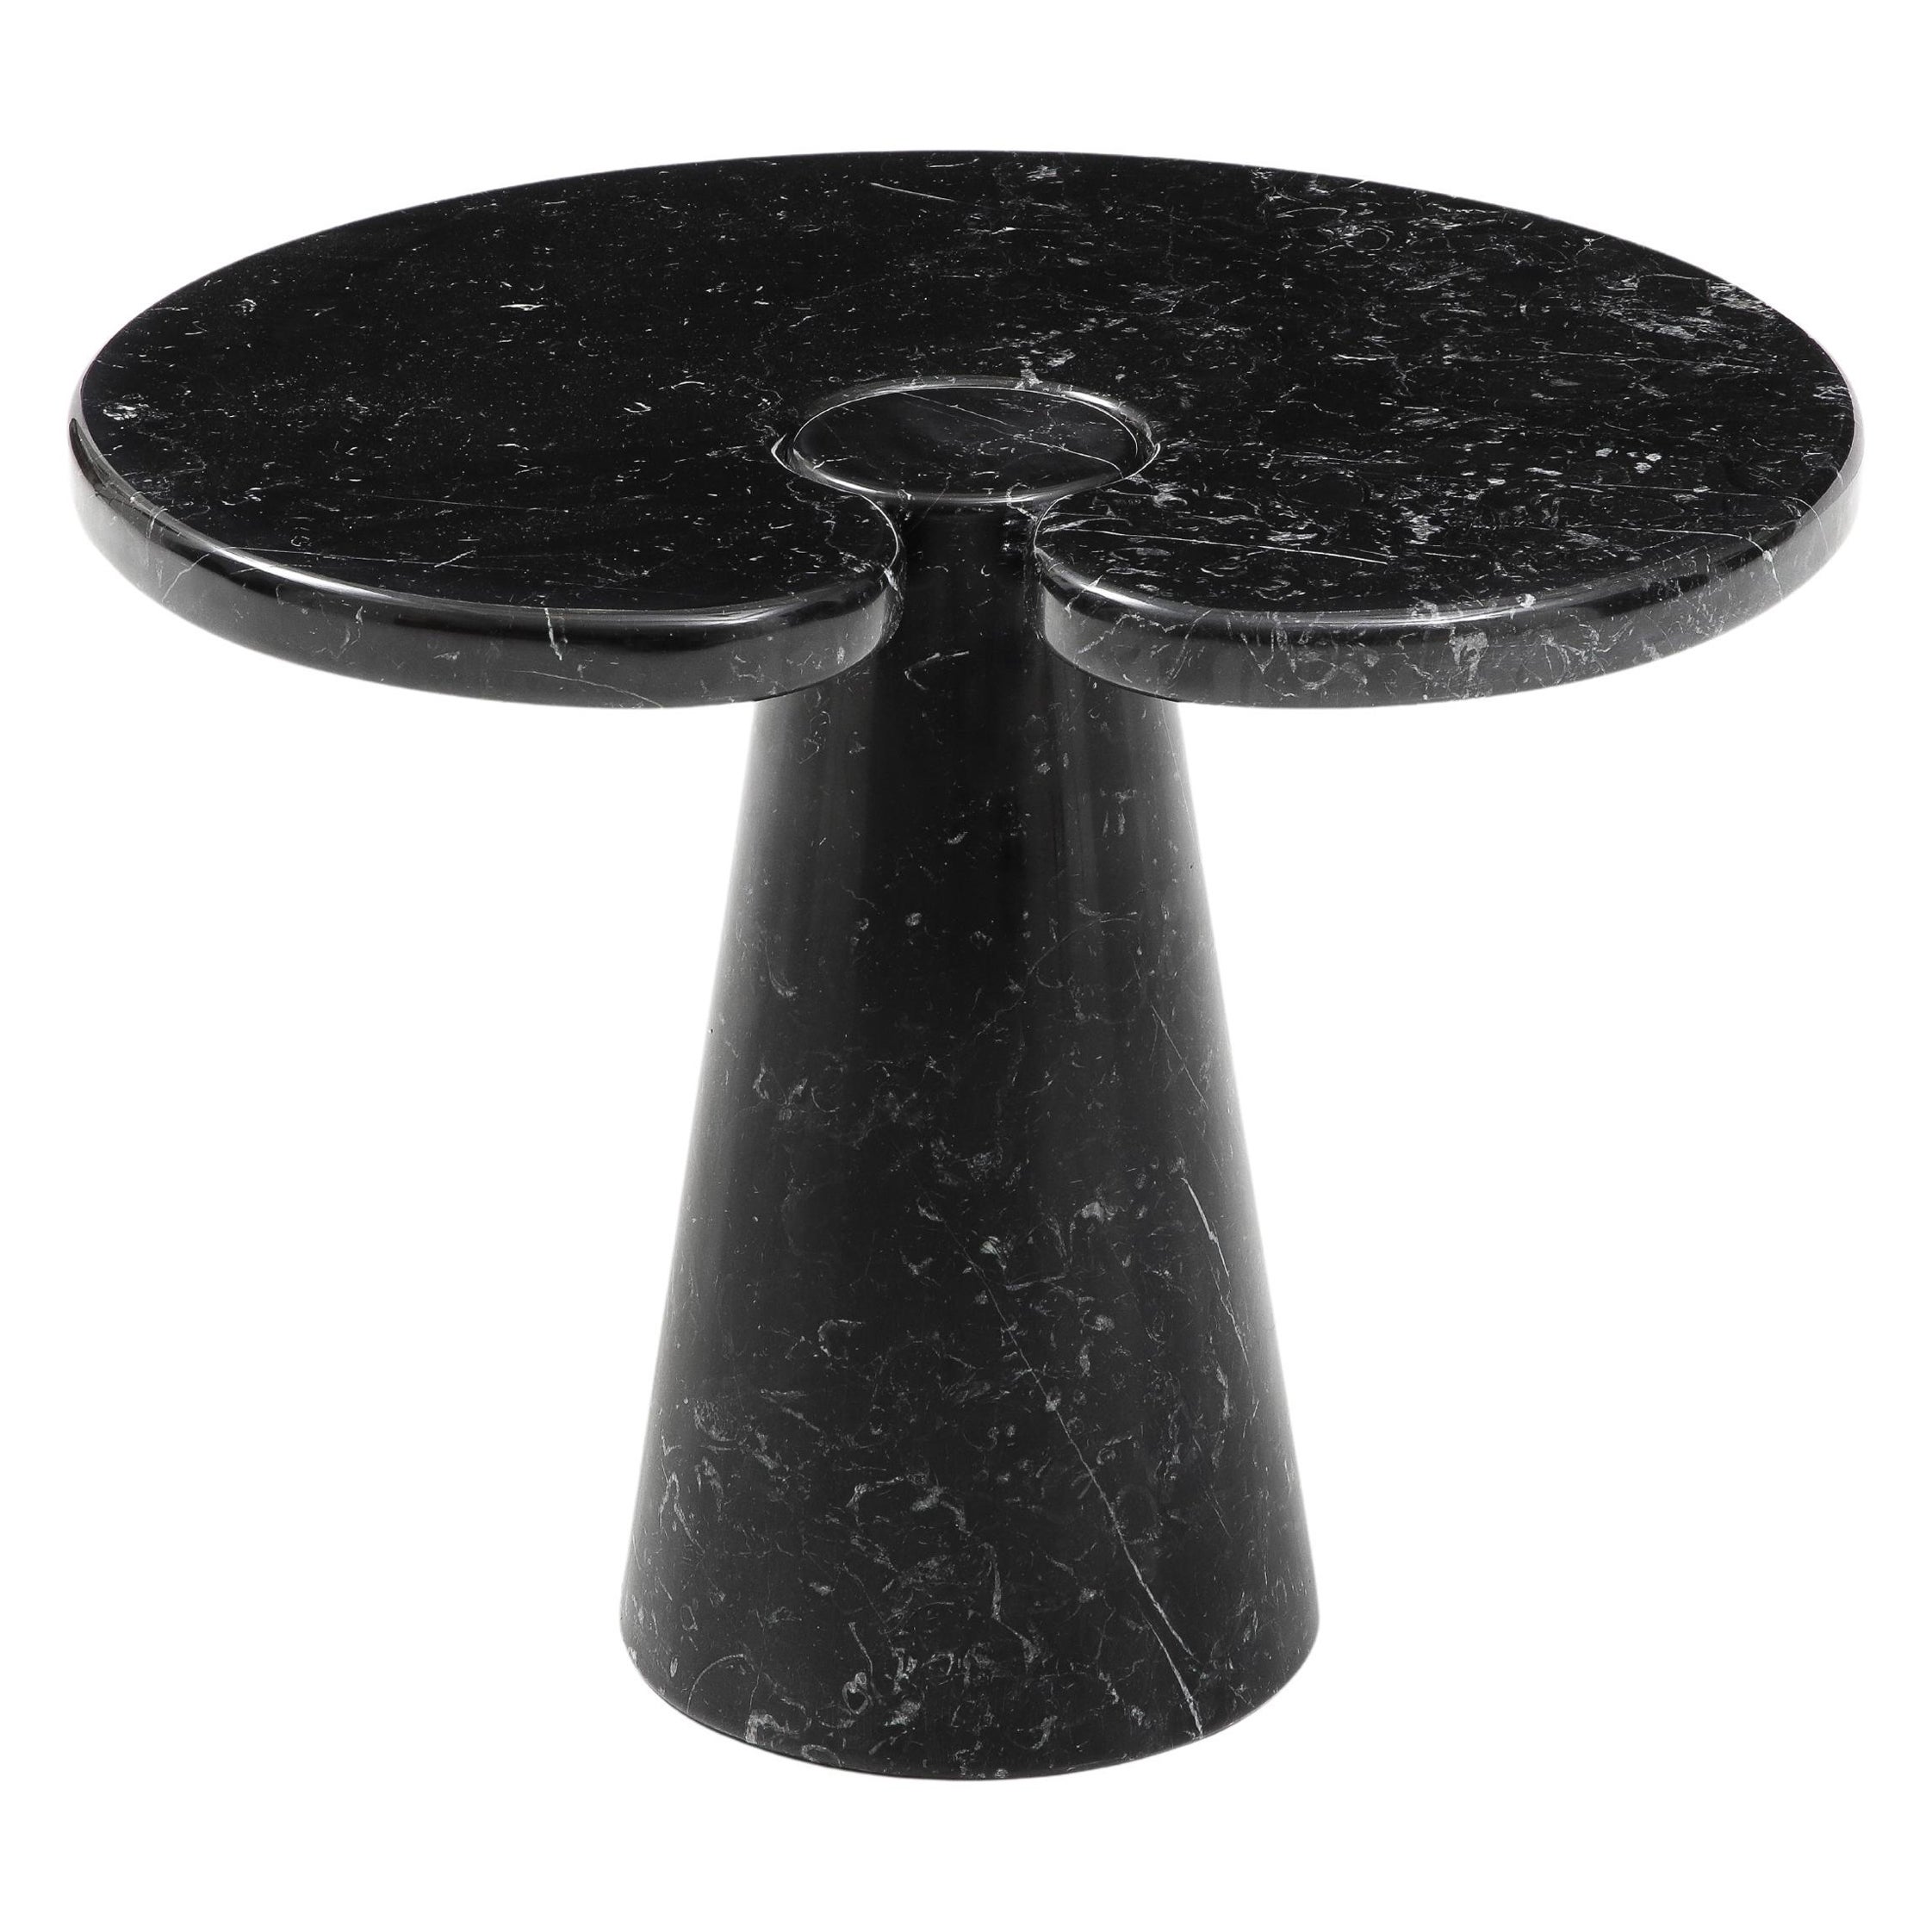 Angelo Mangiarotti Nero Marquina Marble Side Table from 'Eros' Series, 1971